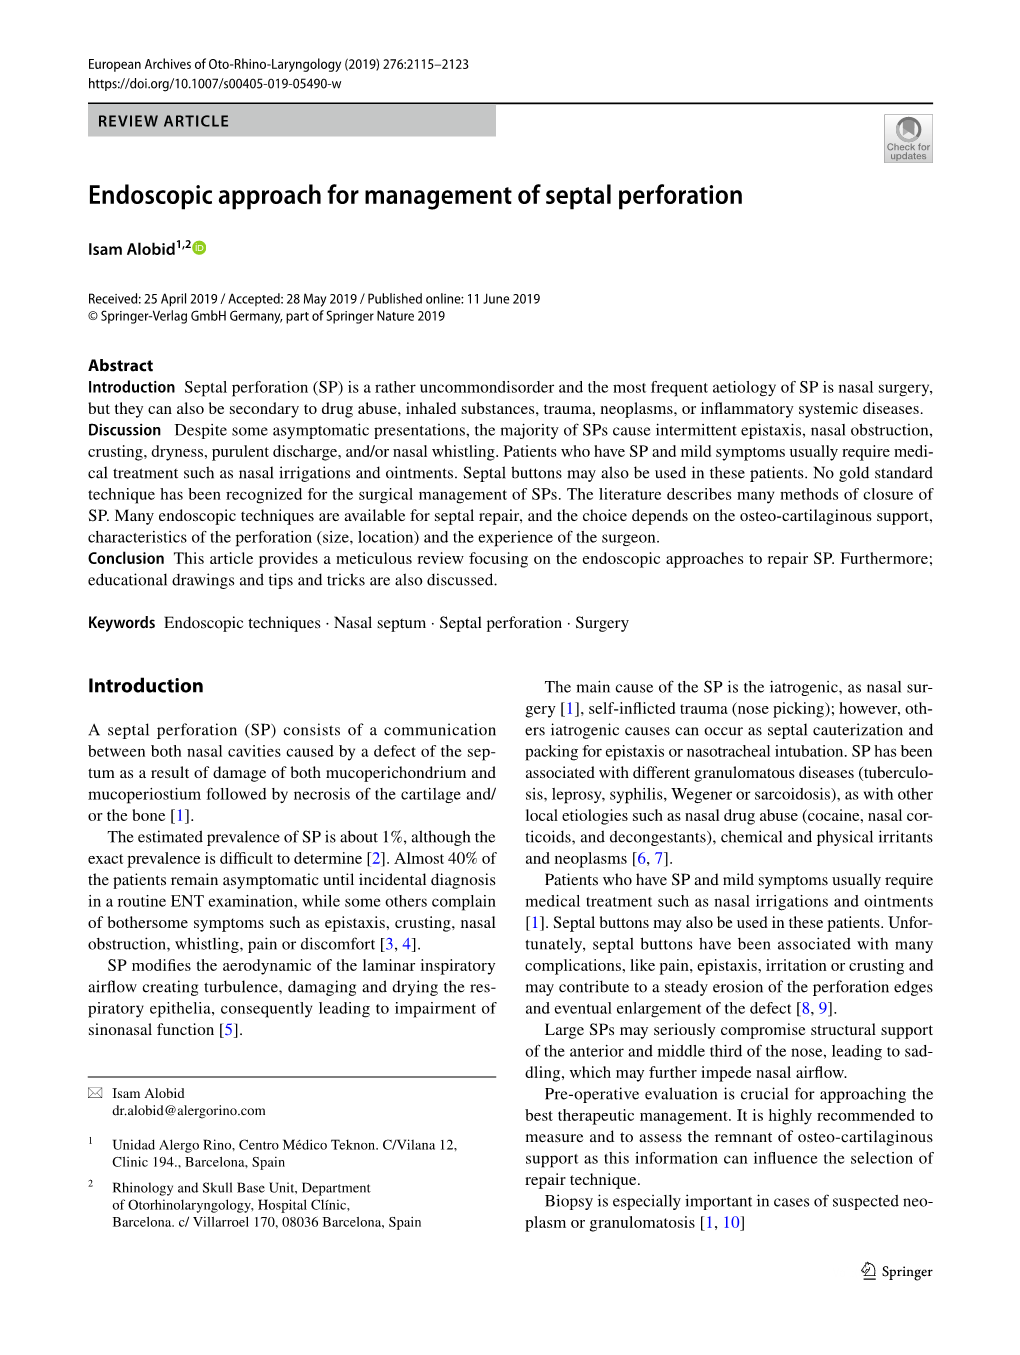 Endoscopic Approach for Management of Septal Perforation